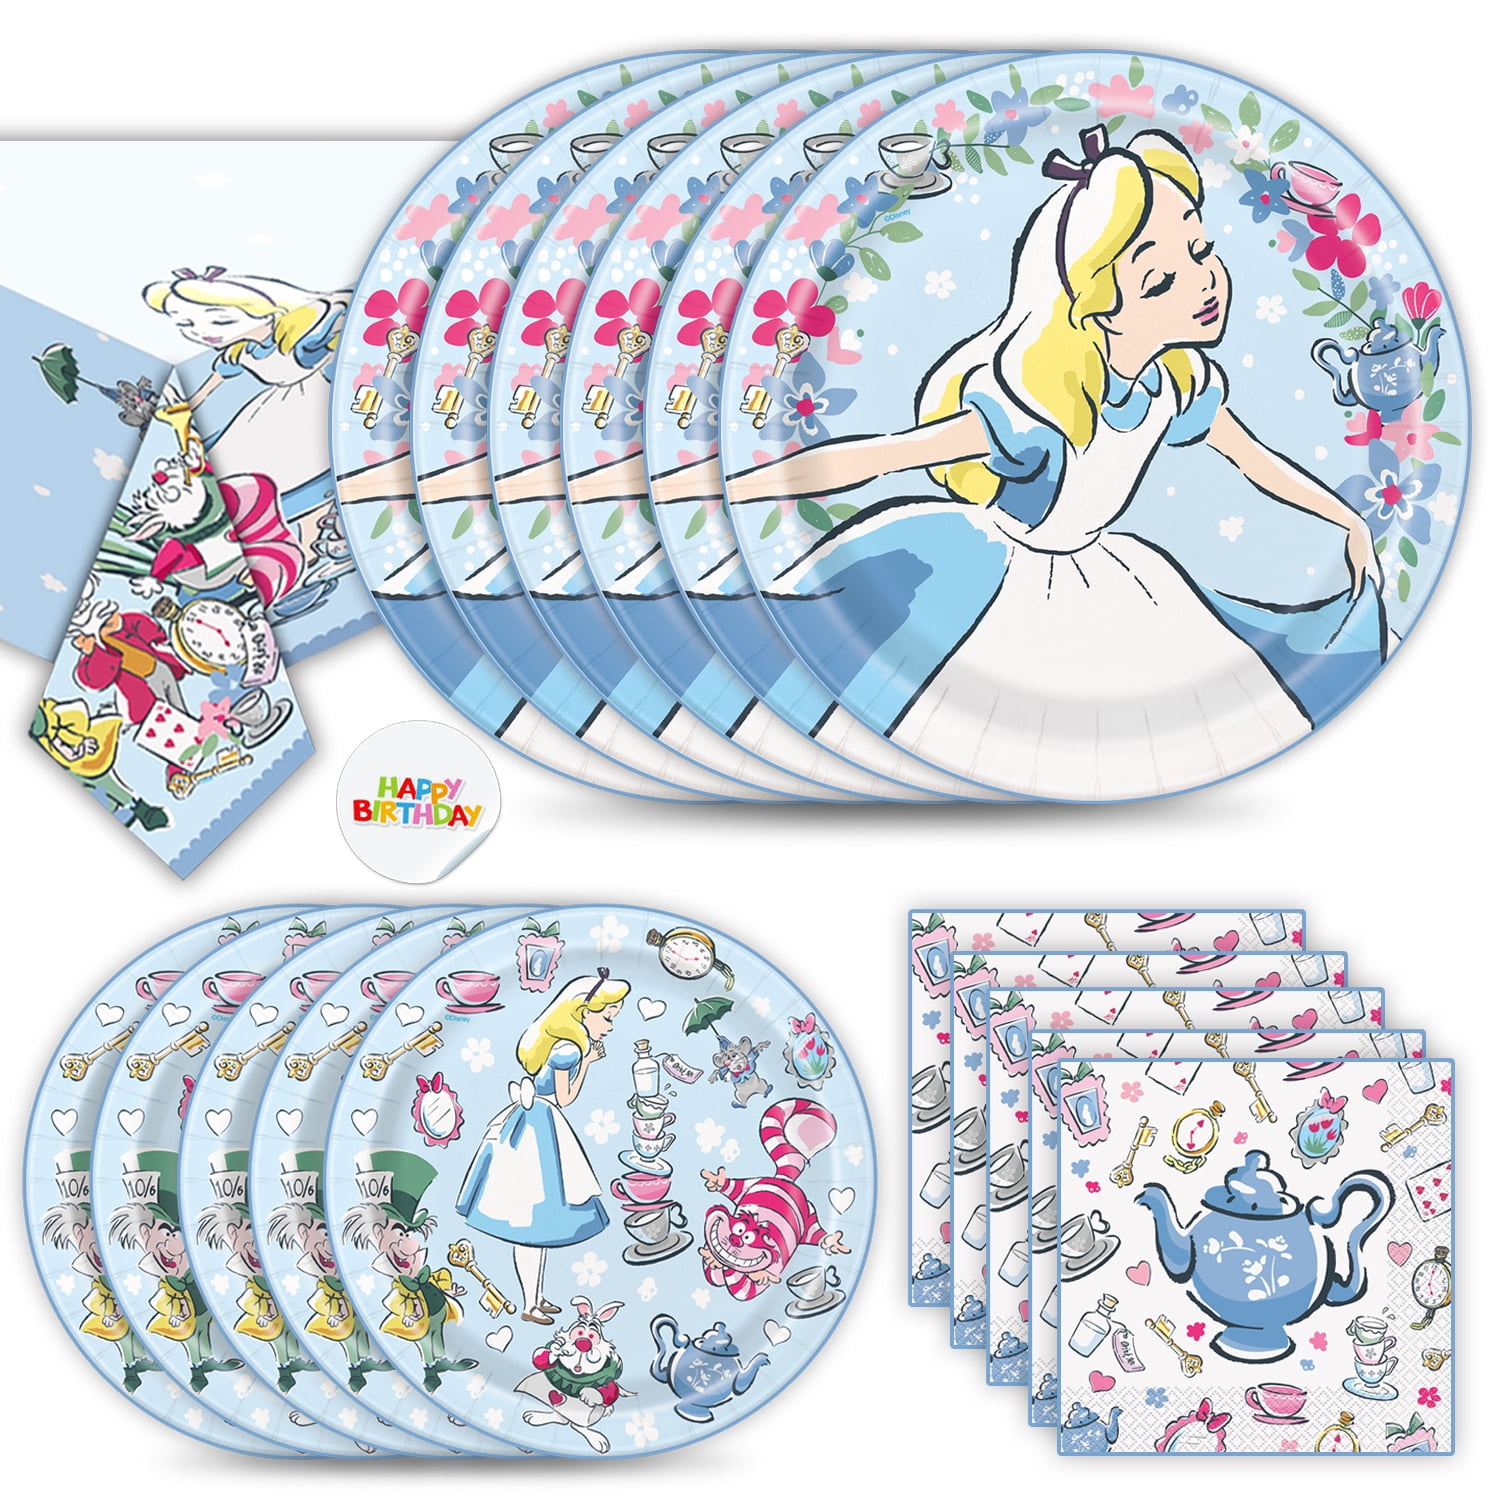 Alice in Wonderland Party Supplies for 16 - Large Paper Plates, Dessert Plates, Napkins & Table Cover - Great Birthday Tableware Set with Alice